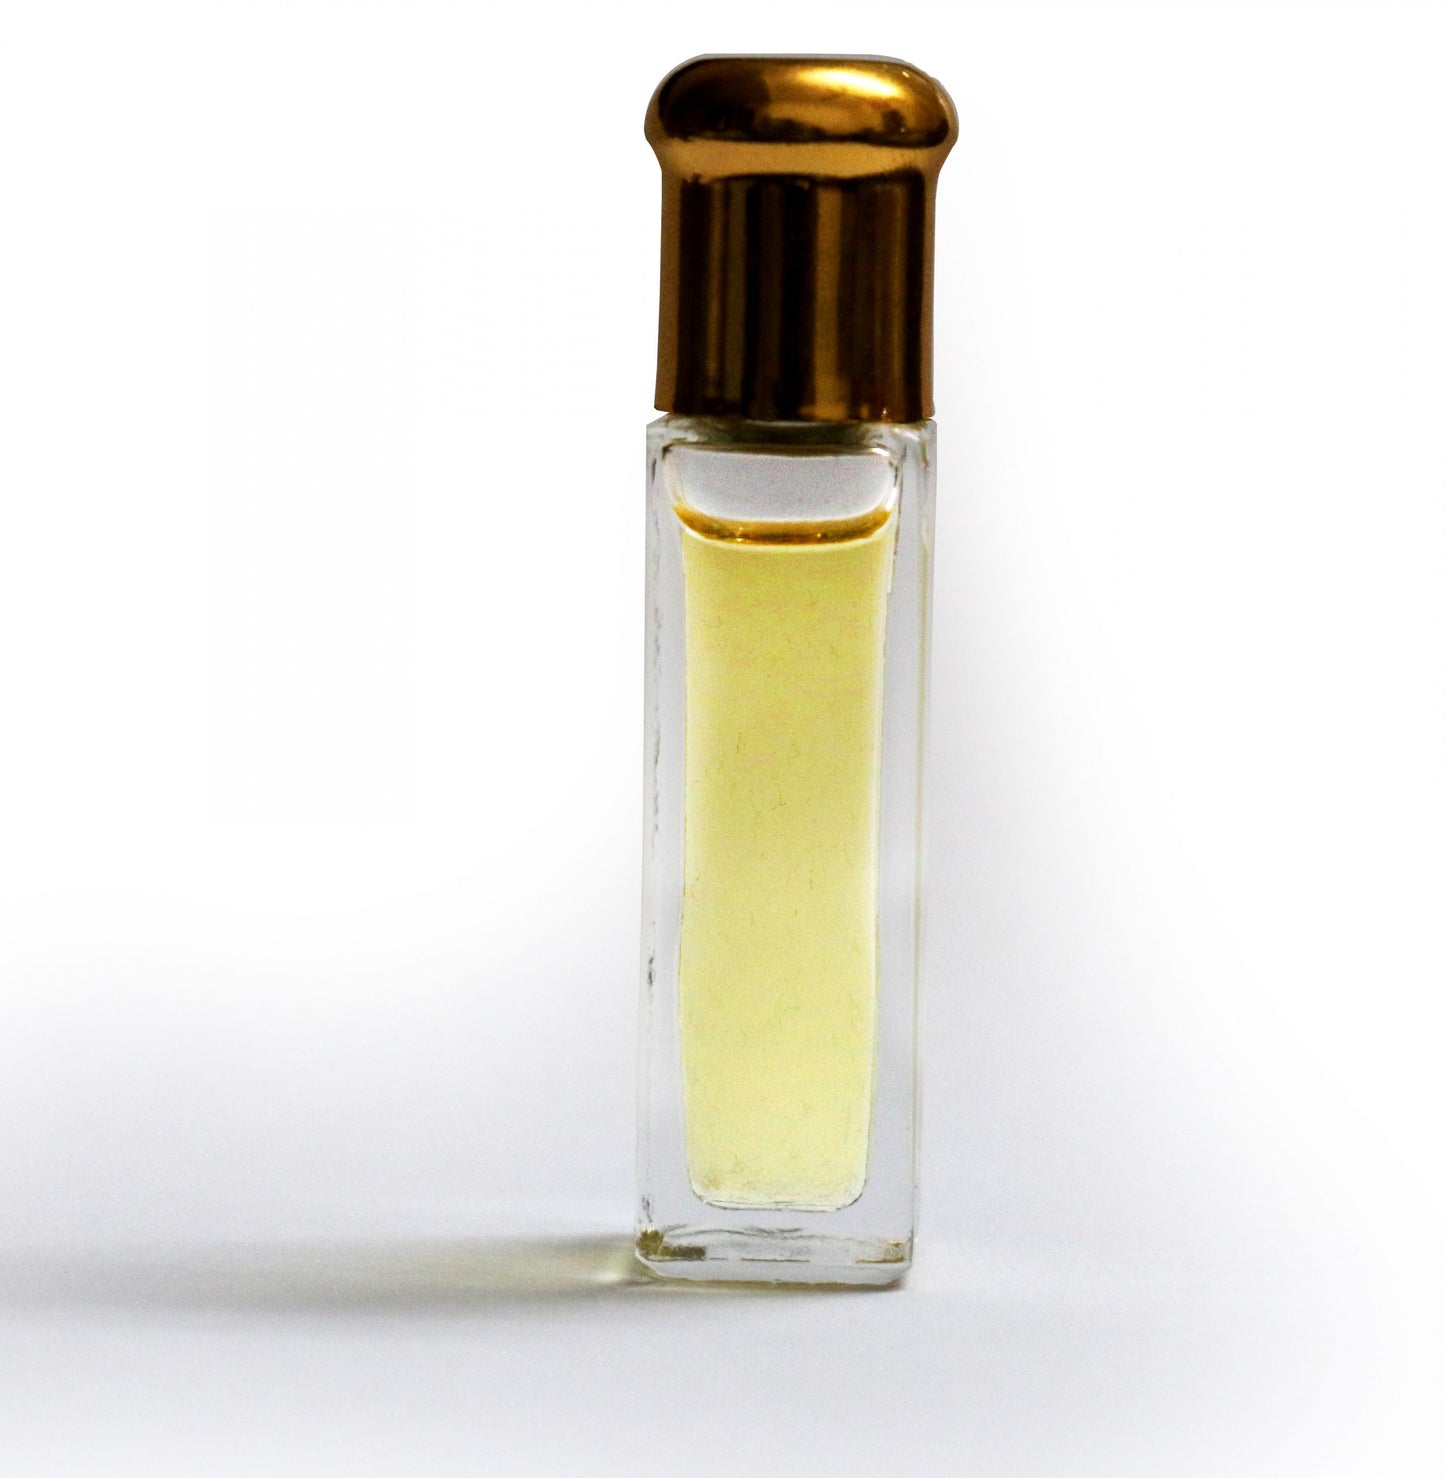 "CHANDAN" PURE NATURAL ATTAR FRAGRANCE ONLY TO BE SOLD IN INDIA